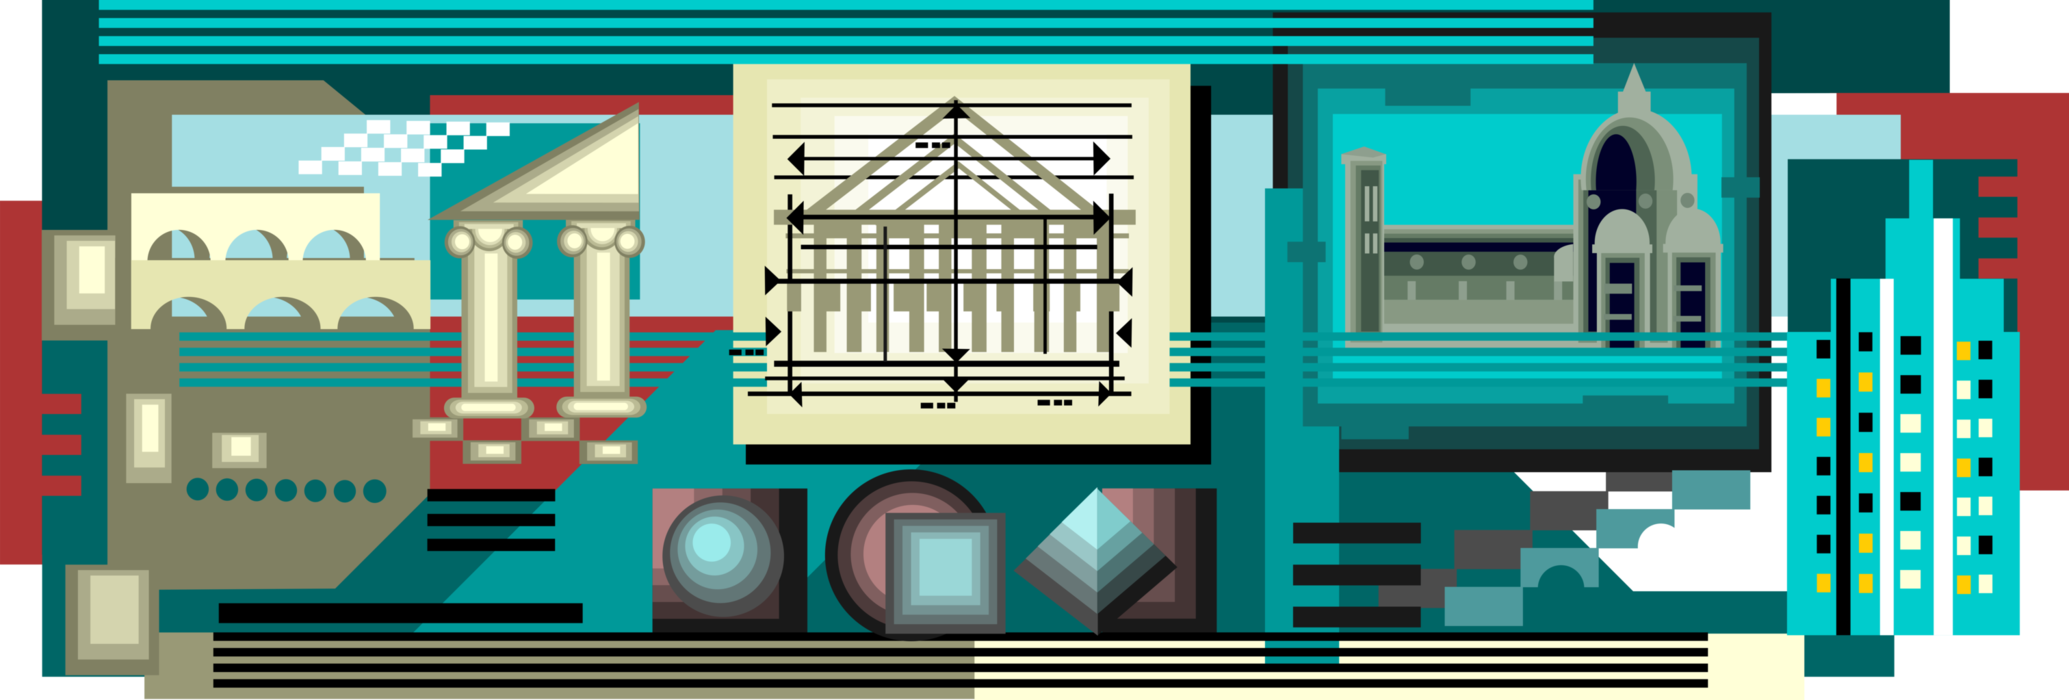 Vector Illustration of Architectural Building and Design Over the Centuries